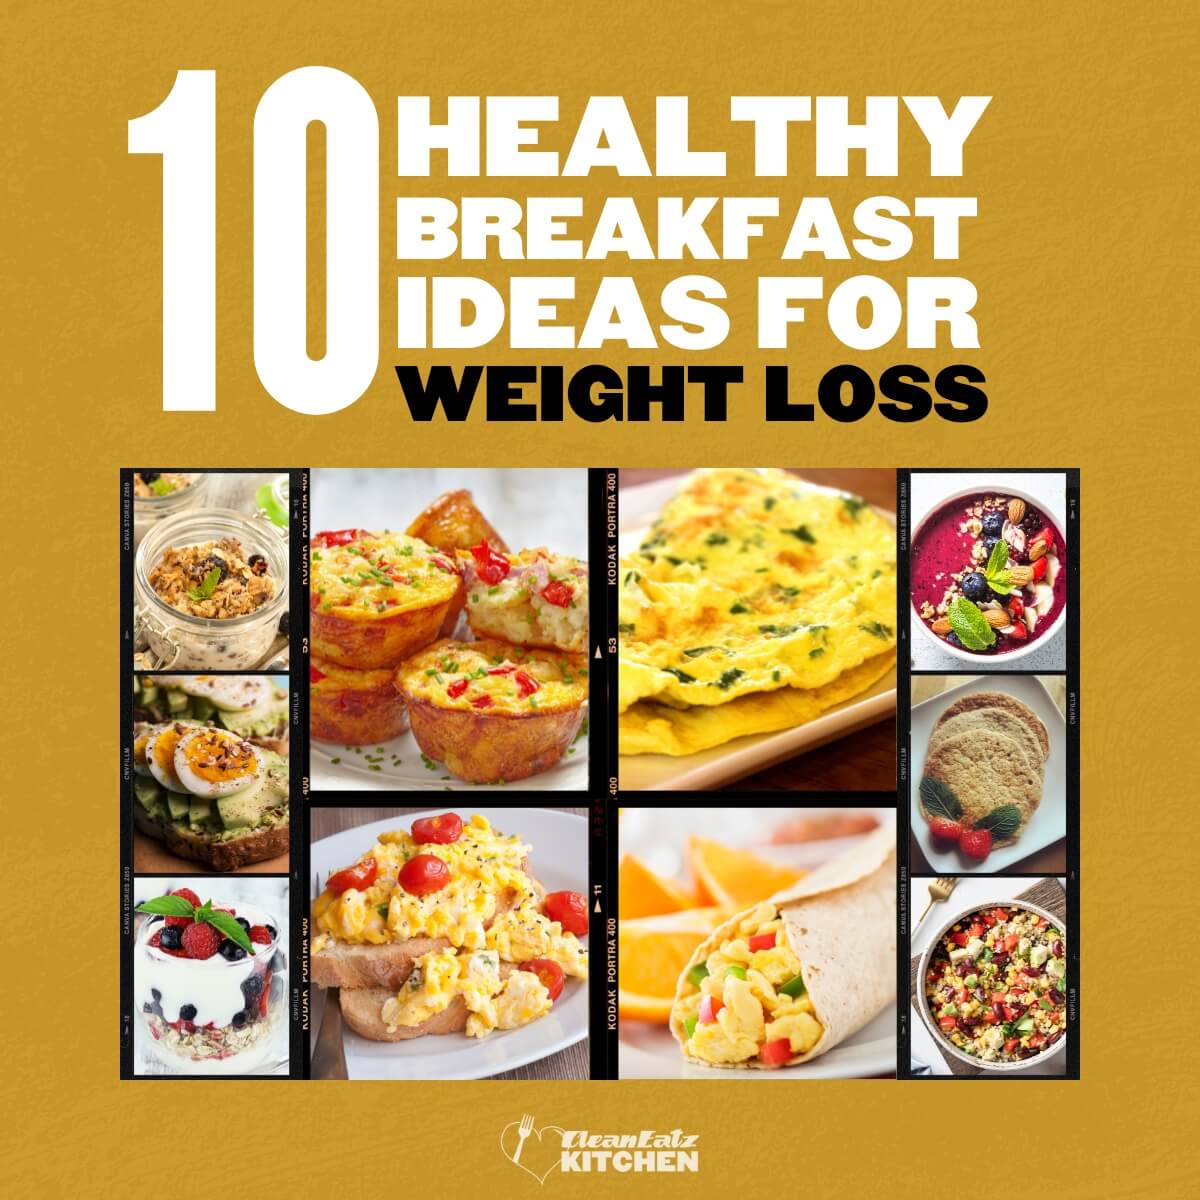 Healthy Breakfast Recipes for Weight Loss | CleanEatzKitchen